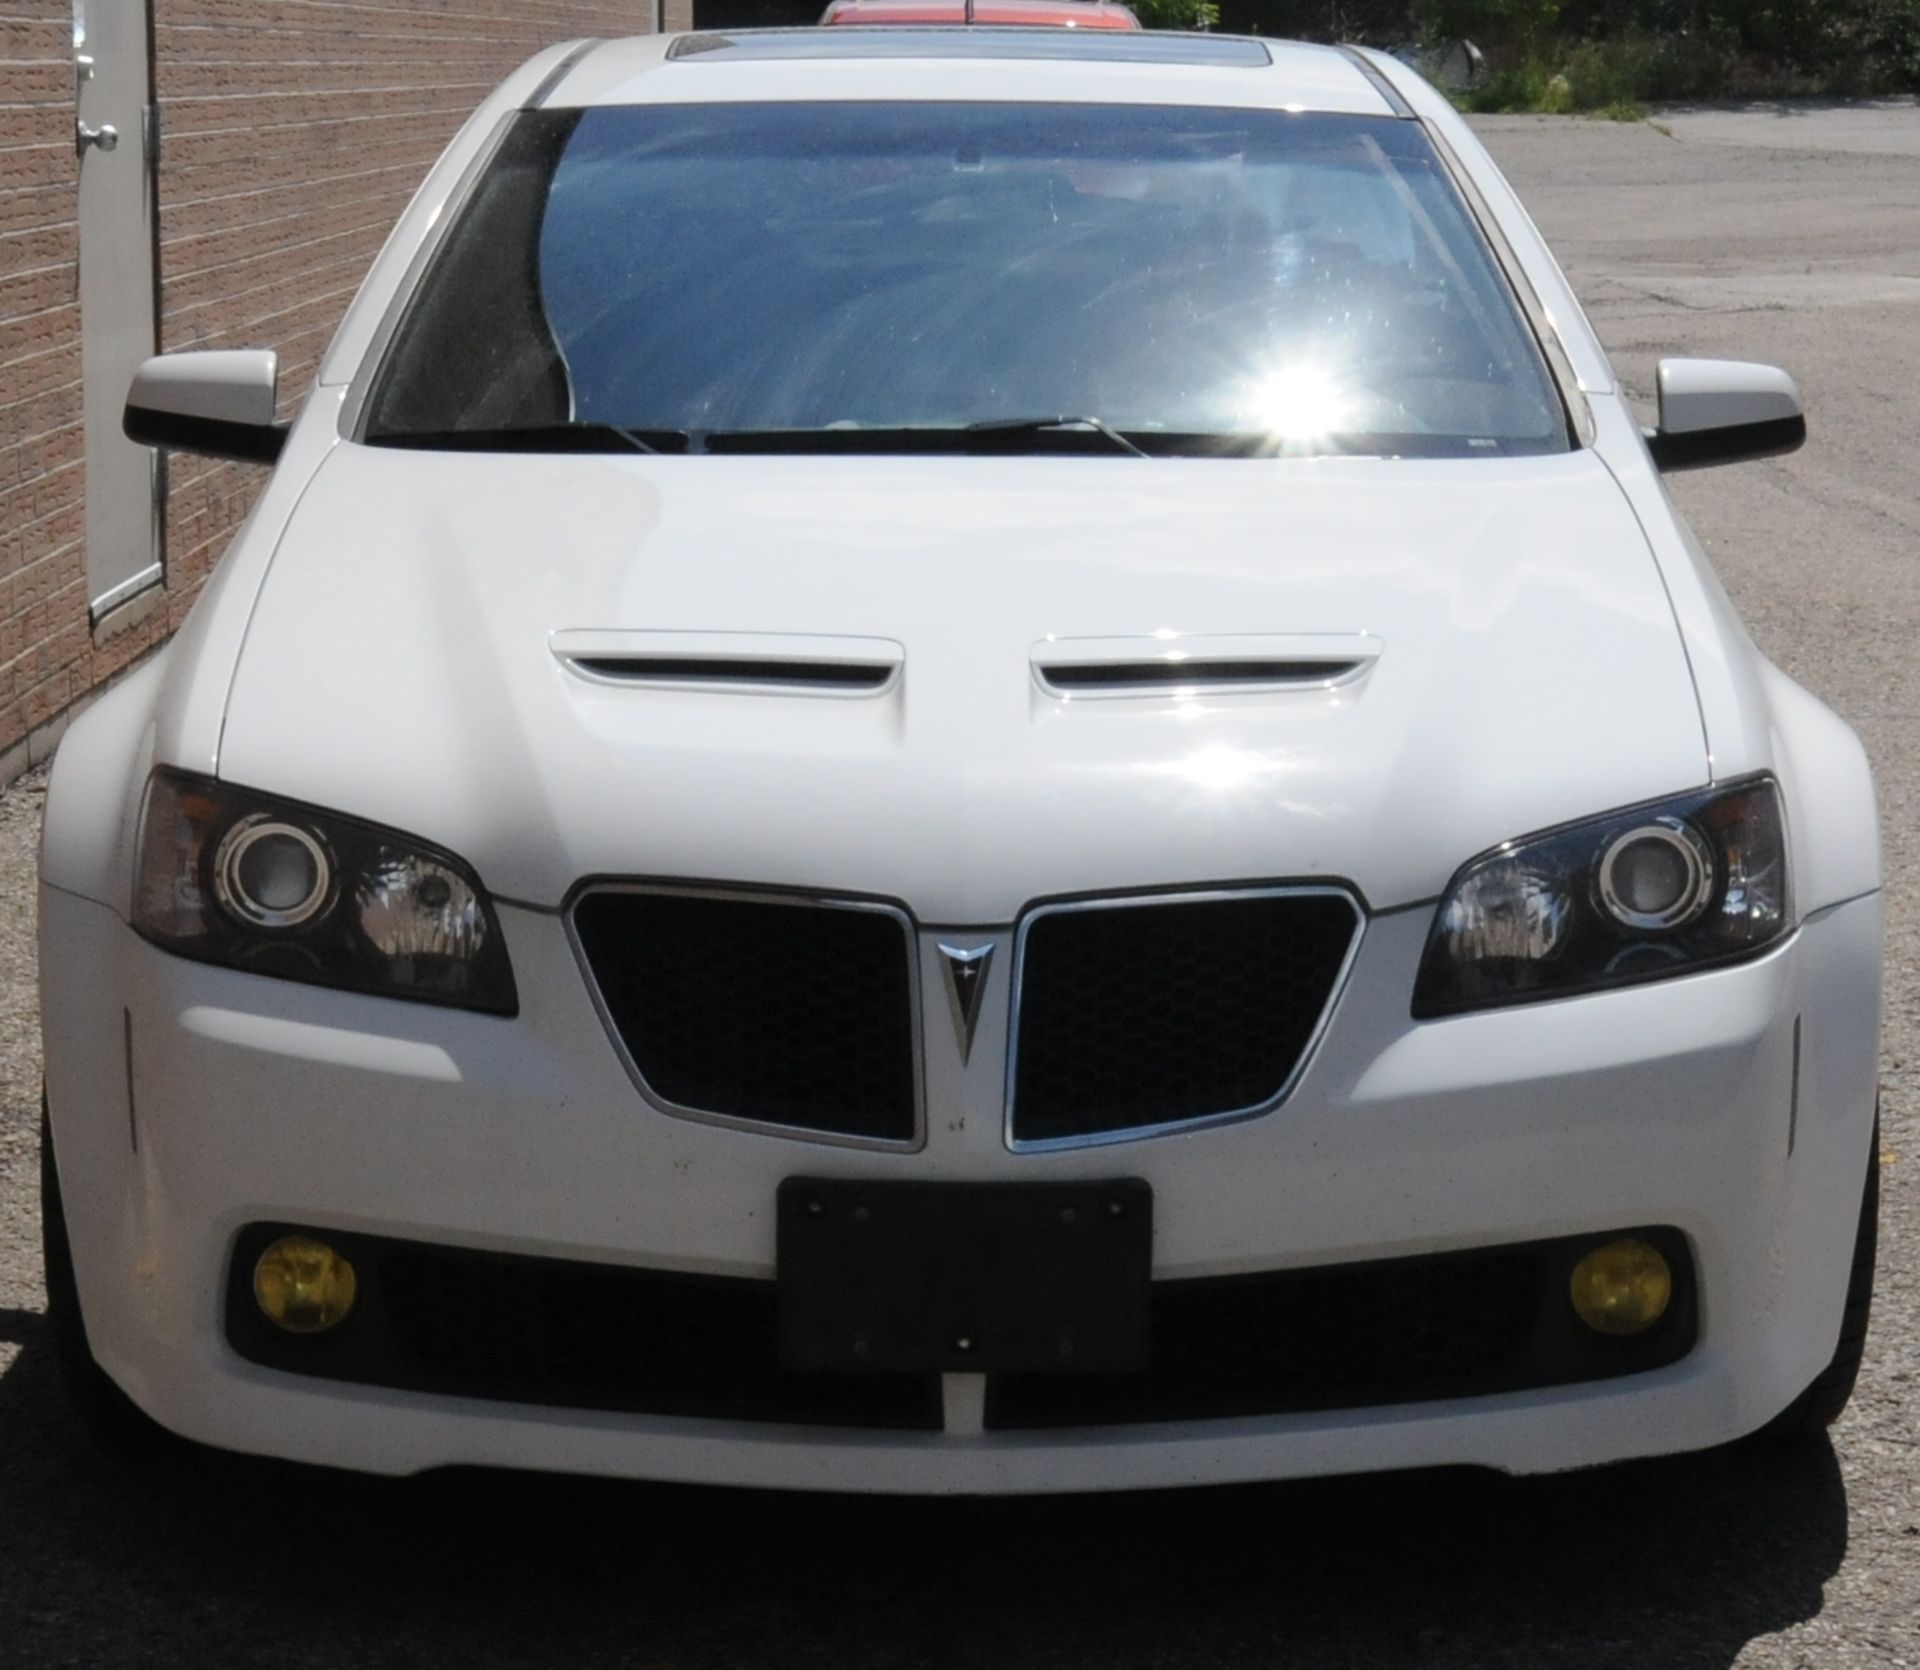 PONTIAC (2009 & IN EXCELLENT CONDITION) G8 GT, HIGH PERFORMANCE 4 DOOR SPORT SEDAN WITH 6.0L V8 - Image 9 of 9